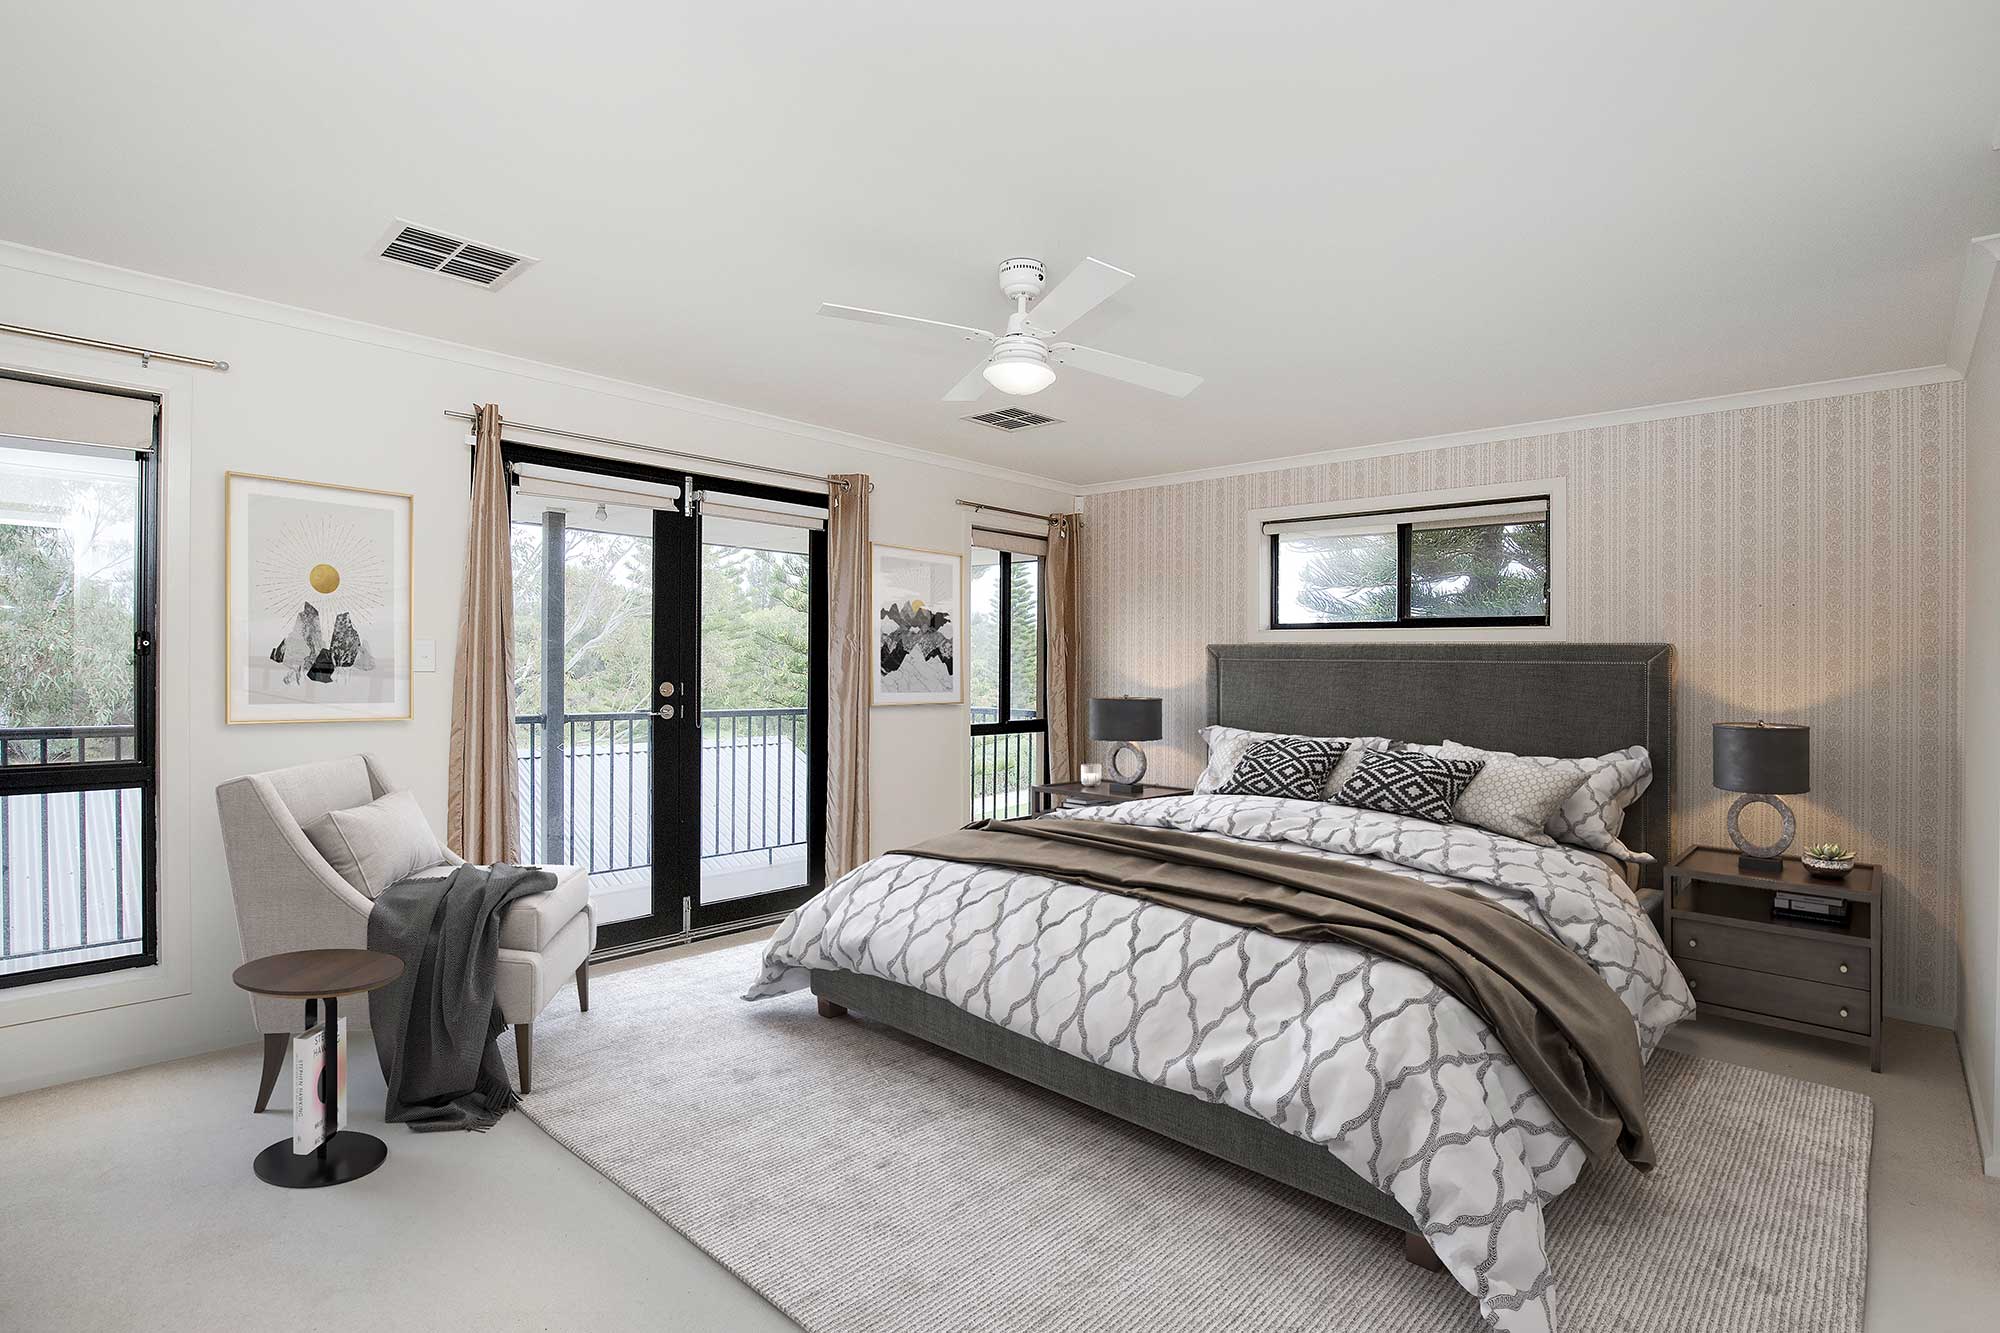 Virtual Home Staging For Real Estate - Bedroom After